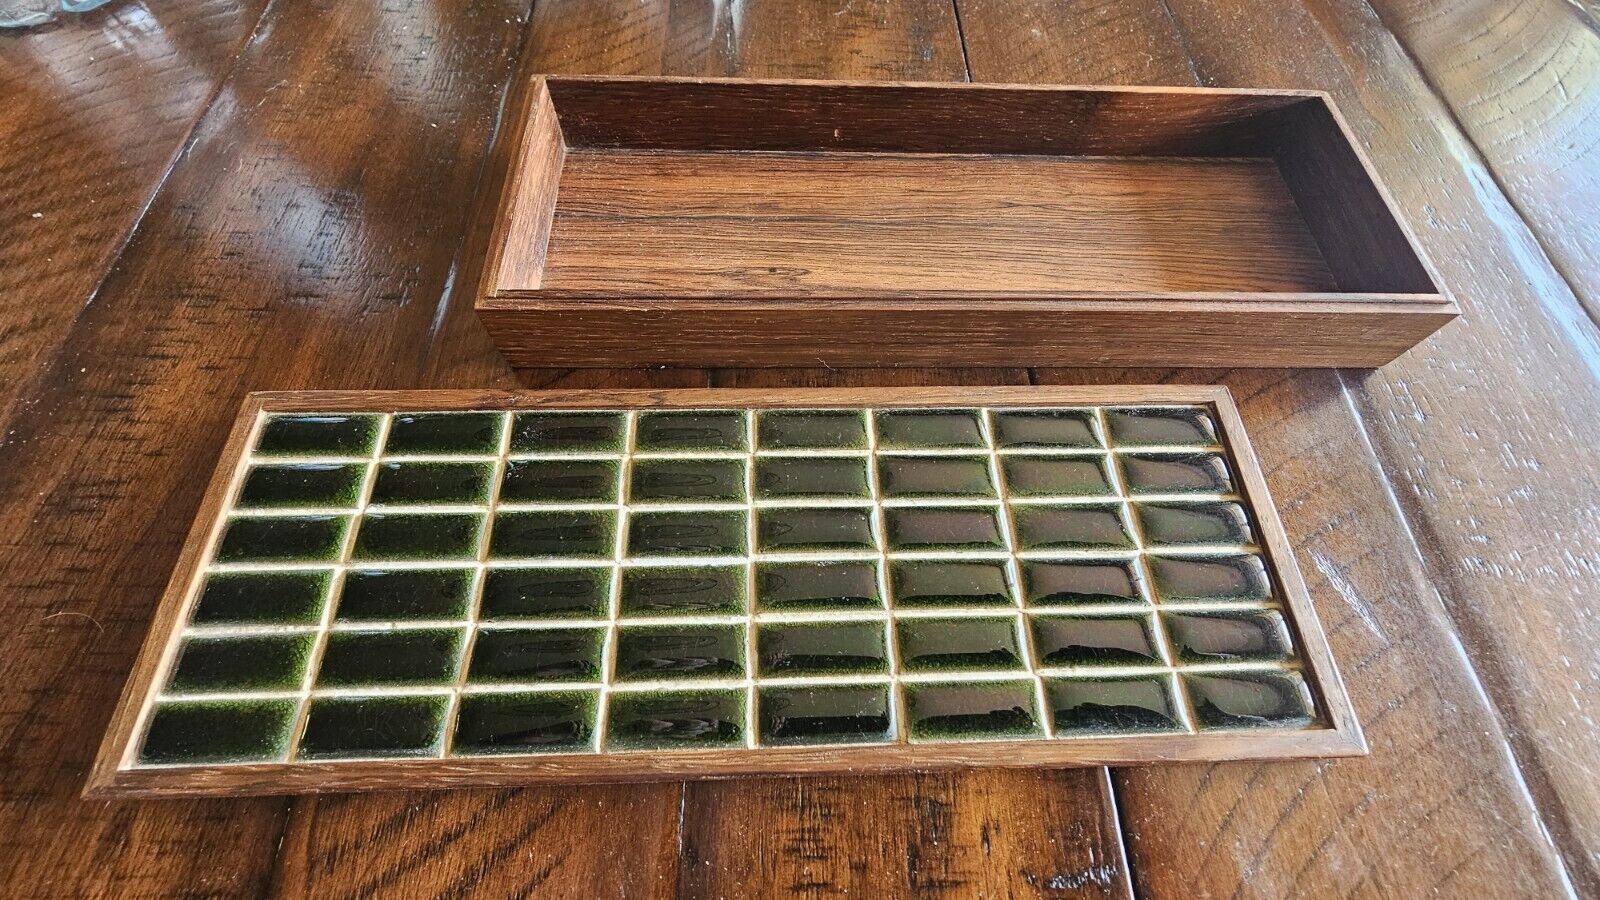 Antique Rosewood And Green Glass Tile Top Flat Jewelry/Keepsake Box